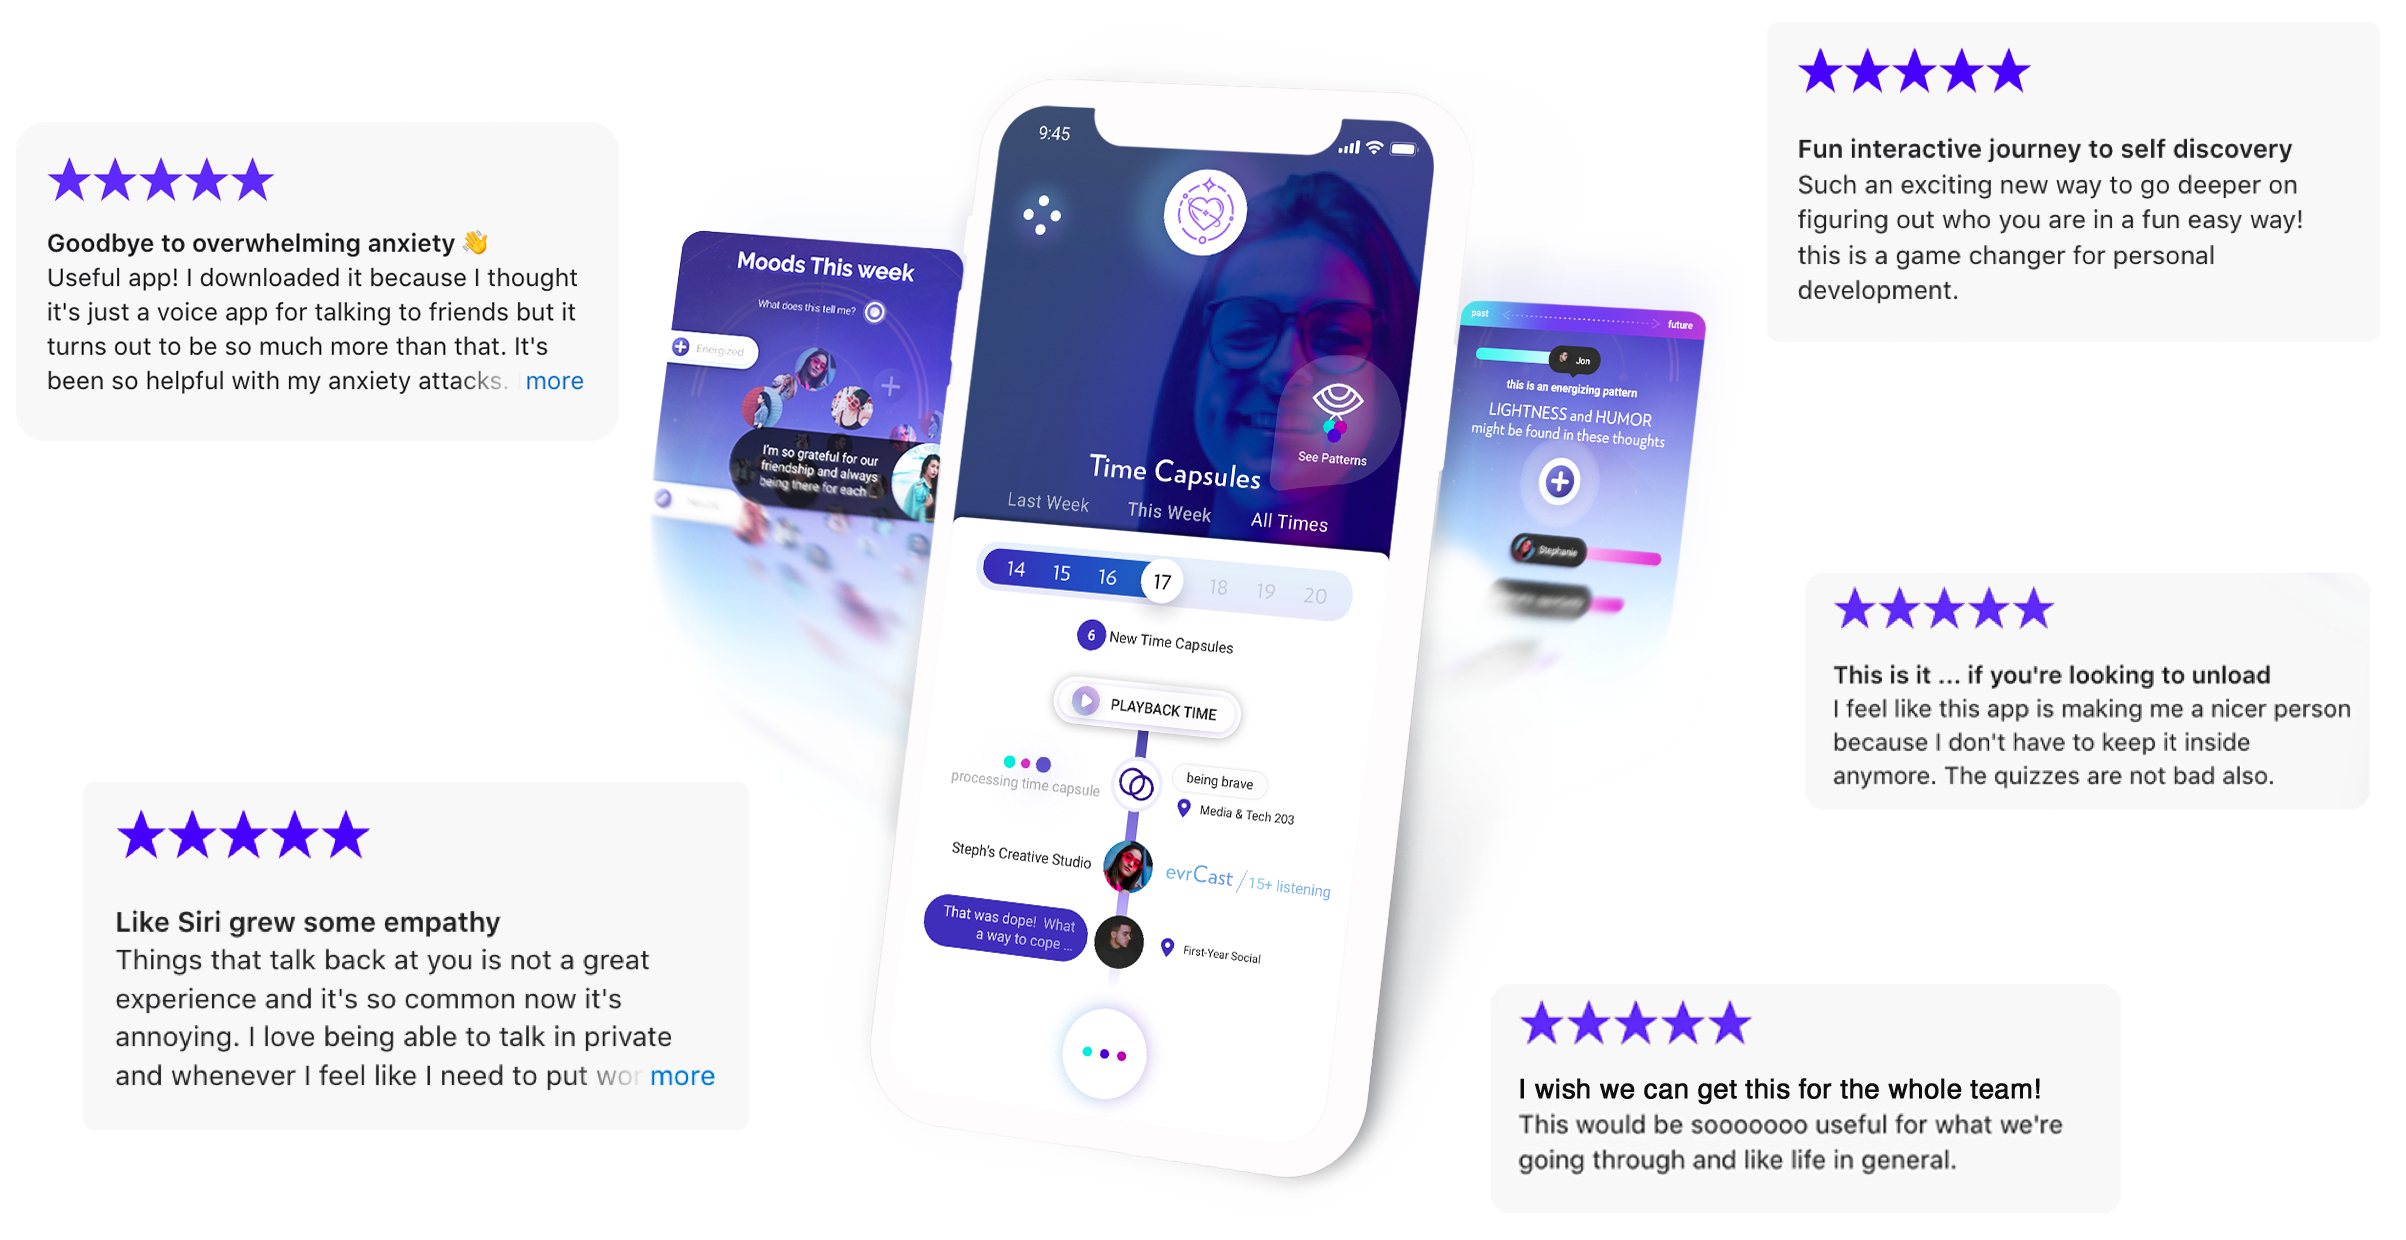 evrmore is the wellness GPS app that helps improve student athlete mental health and engagement. It addresses lackluster engagement and deteriorating mental health based on today's behaviors of tech natives